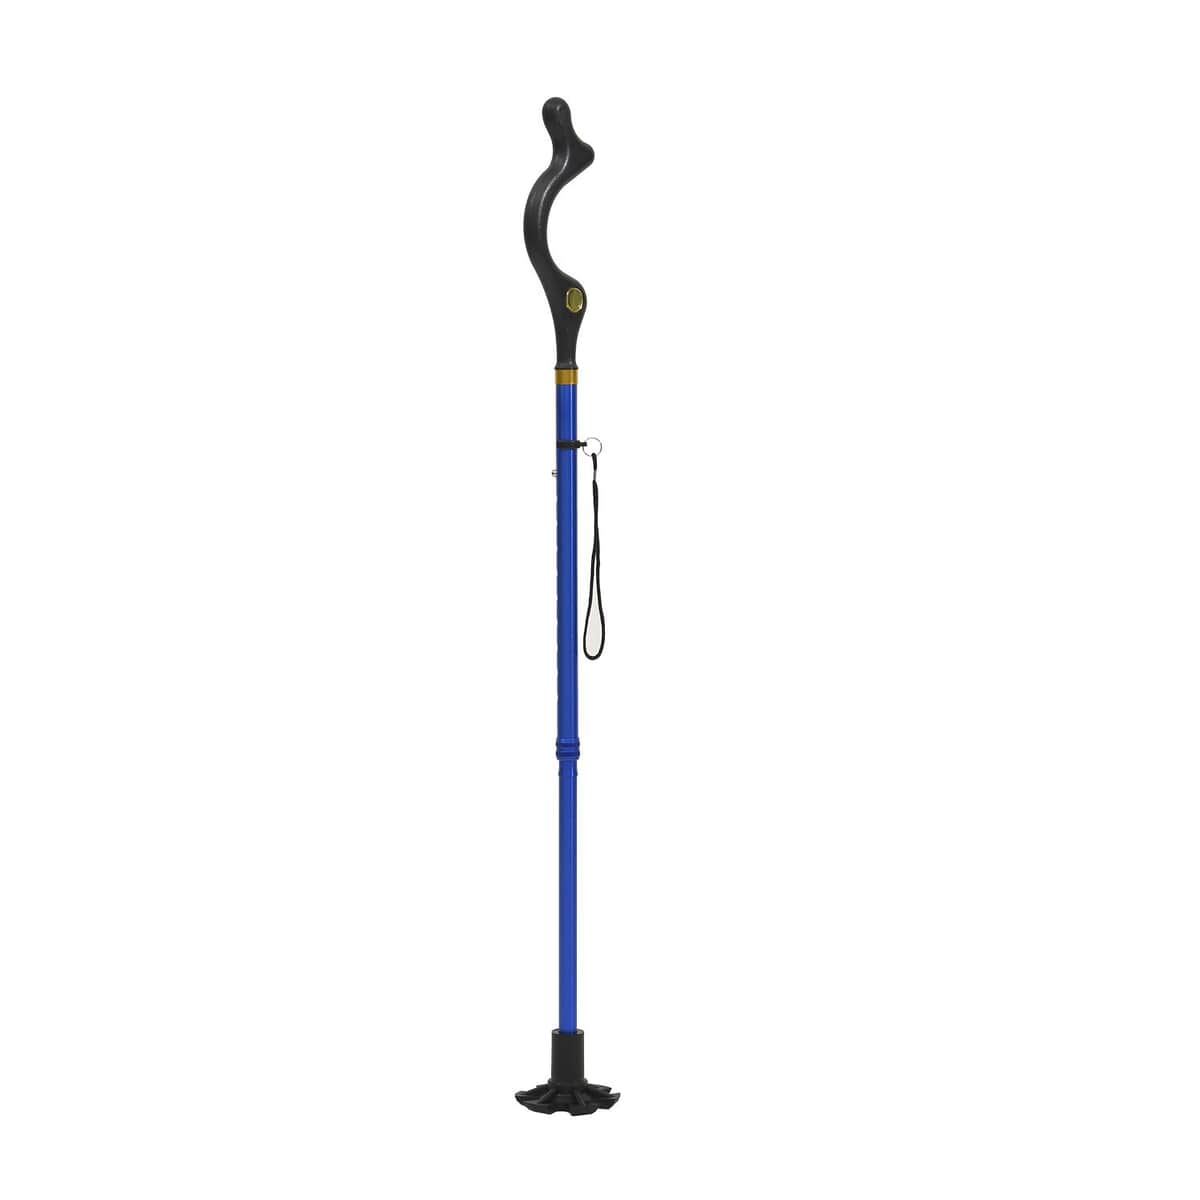 HOMESMART Black Posture Cane with 10 Adjustable Height Positions from 40 to 49 (26.89x4.13) image number 0